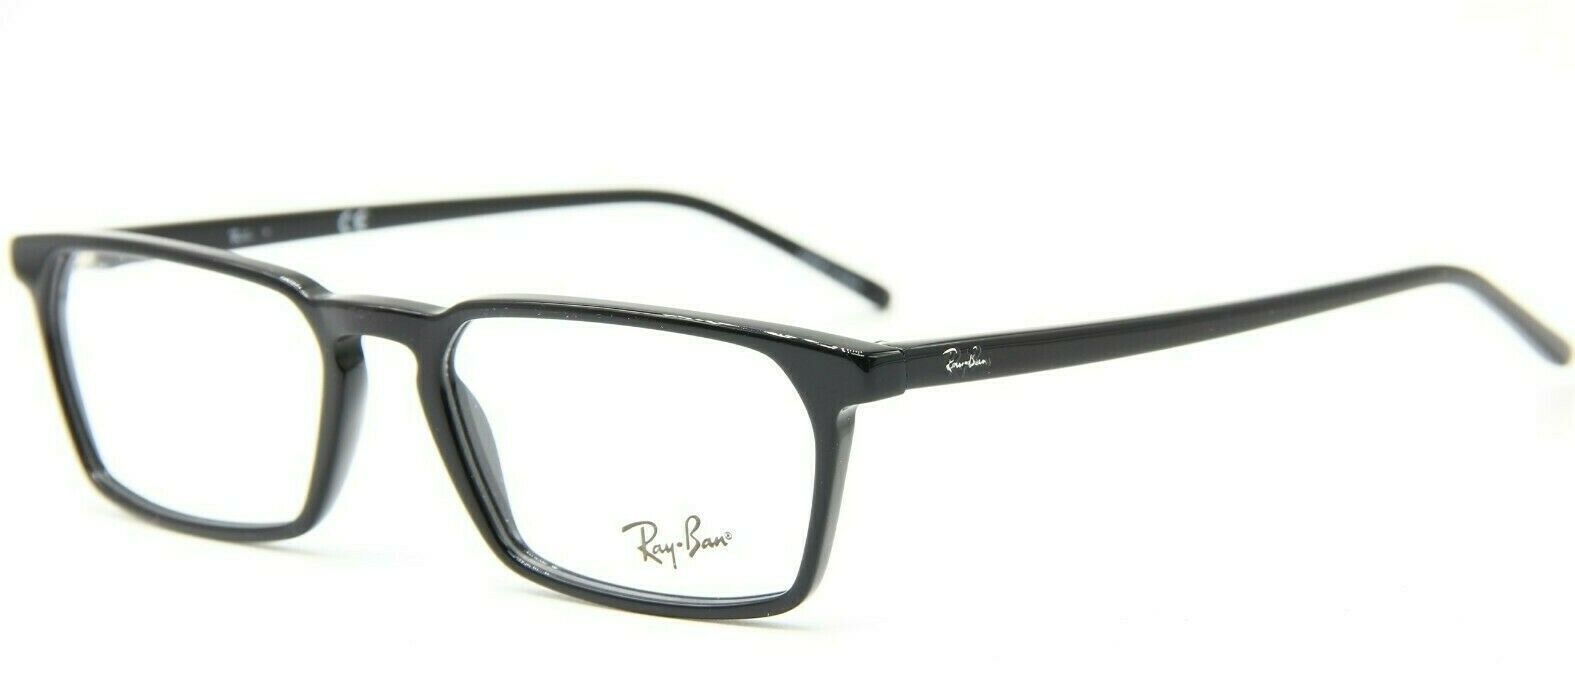 NEW RAY-BAN RB 5372 2000 BLACK EYEGLASSES AUTHENTIC FRAME RX RB5372 54 ...